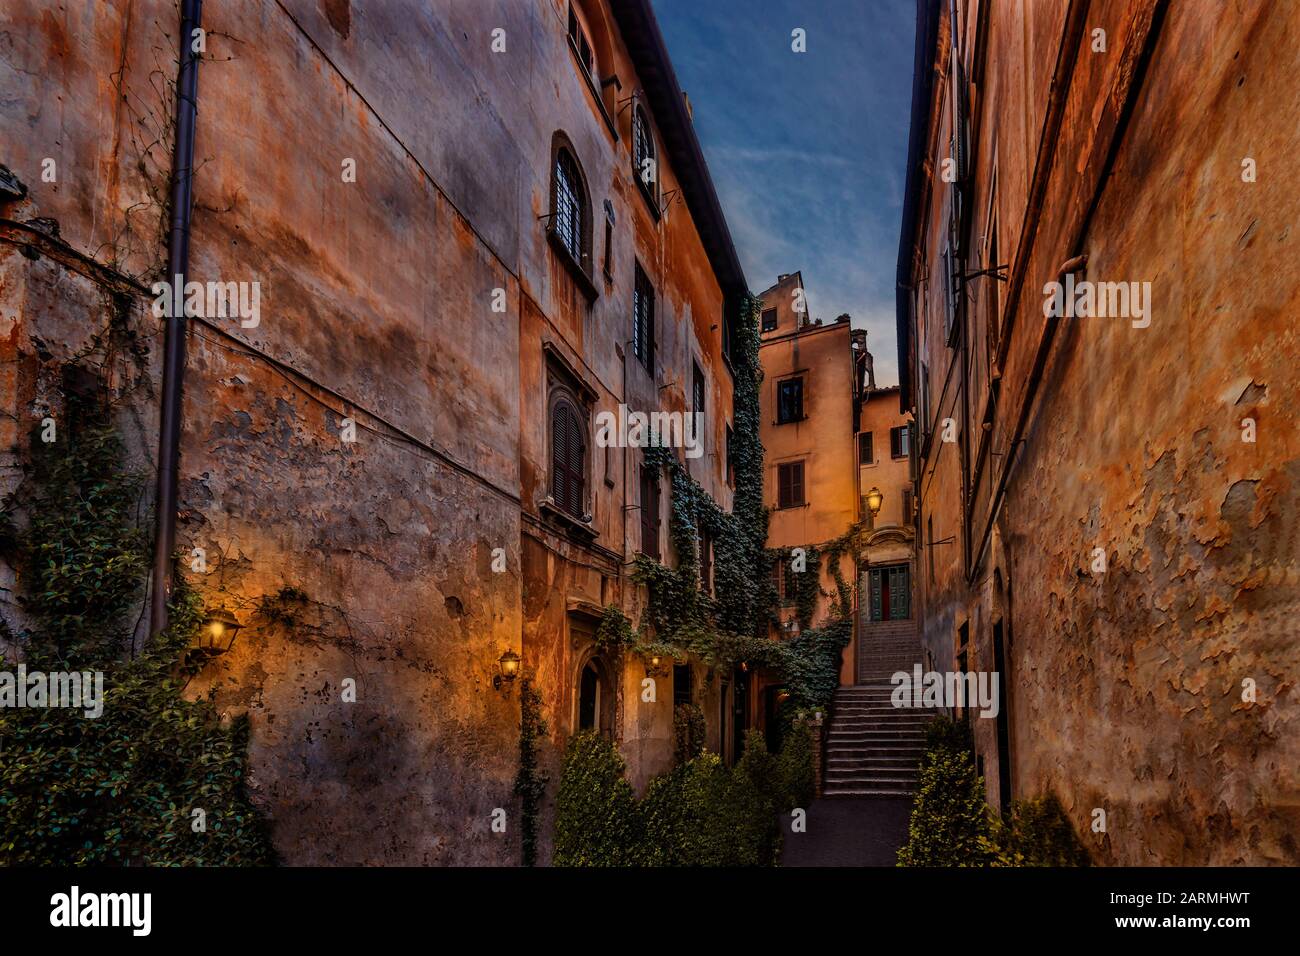 Historic alley in Rome Italy with old traditional houses illuminated at night Stock Photo